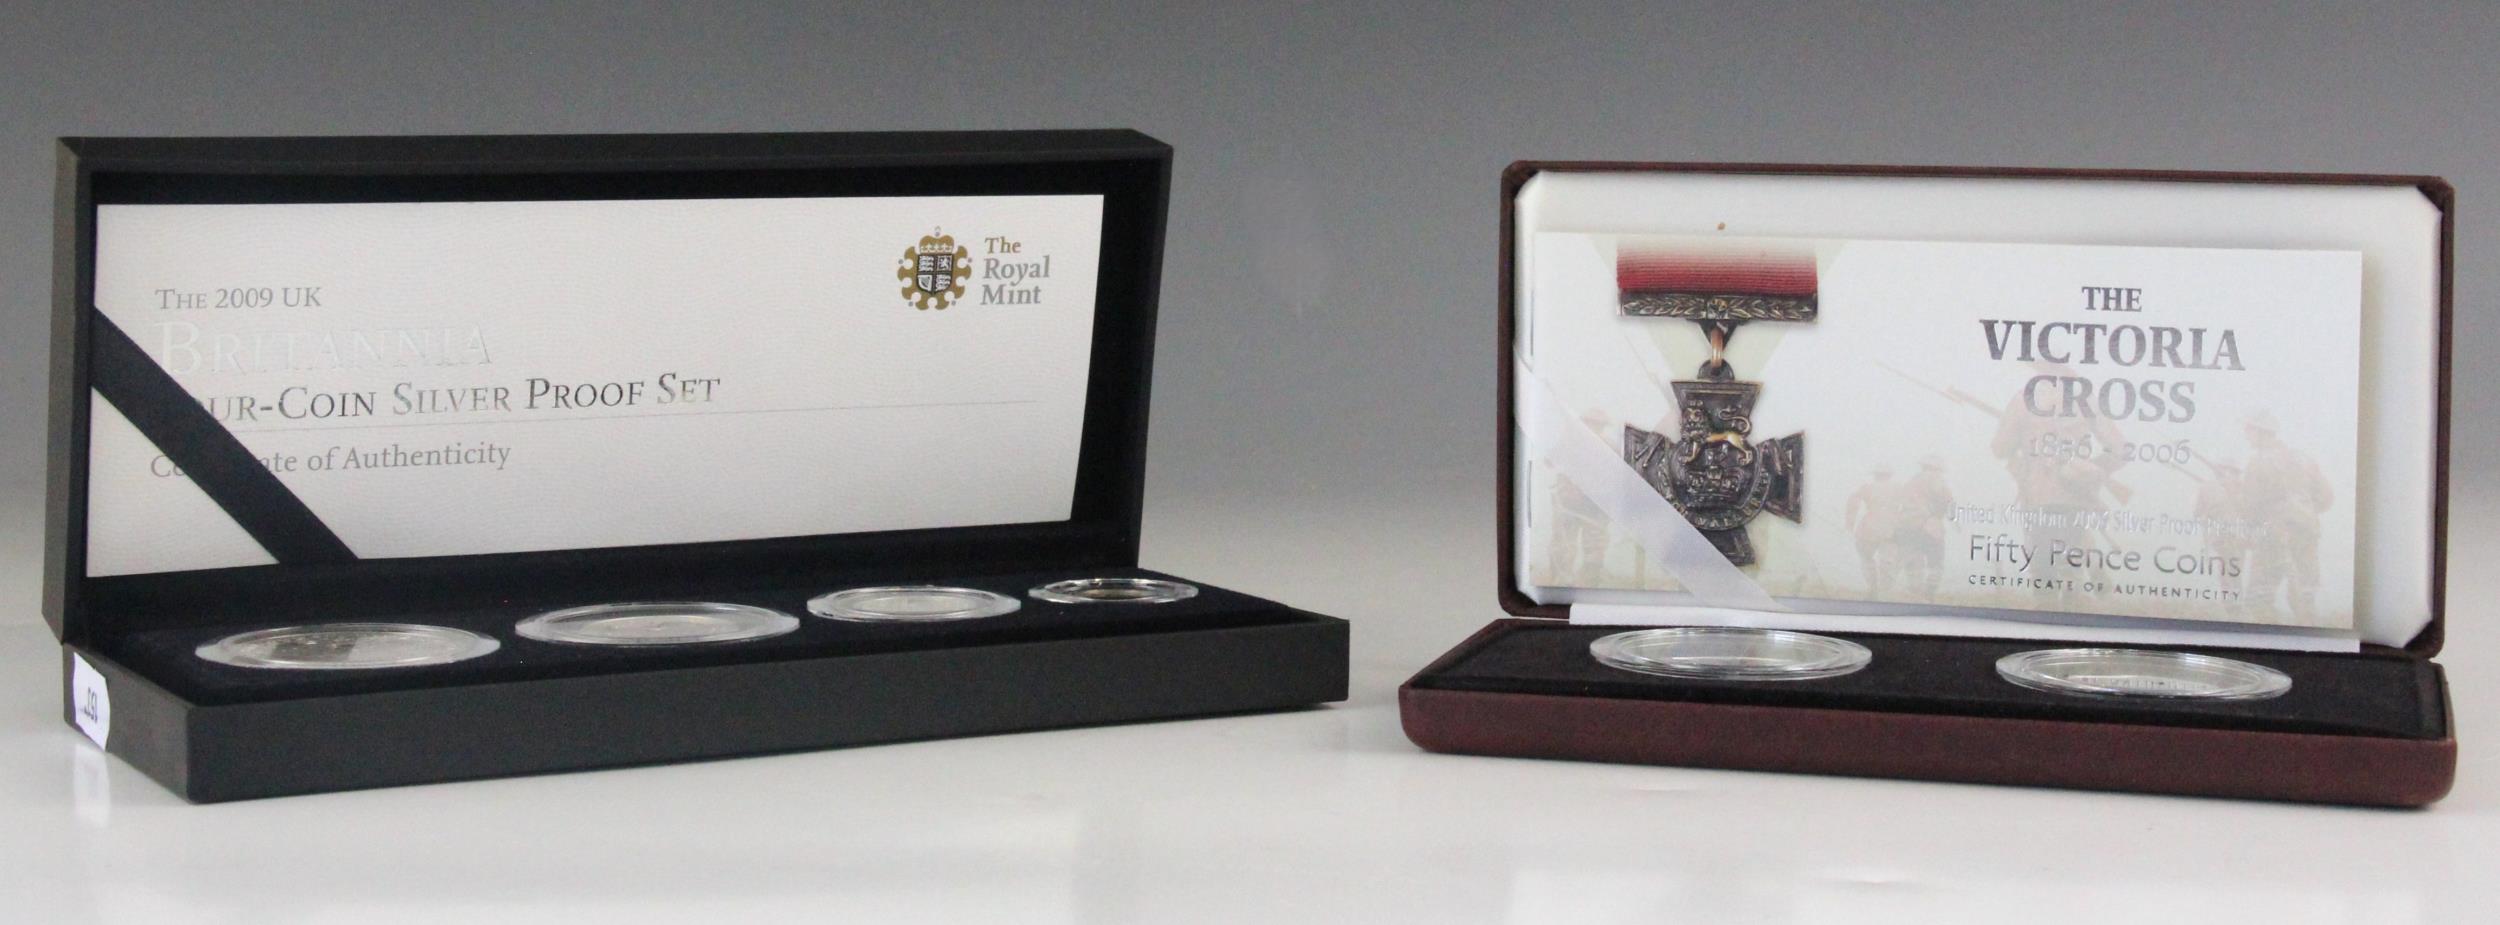 Elizabeth II (1952-2022), The 2009 Britannia Four Coin Silver Proof Set, comprising: £2, £1, 50p and